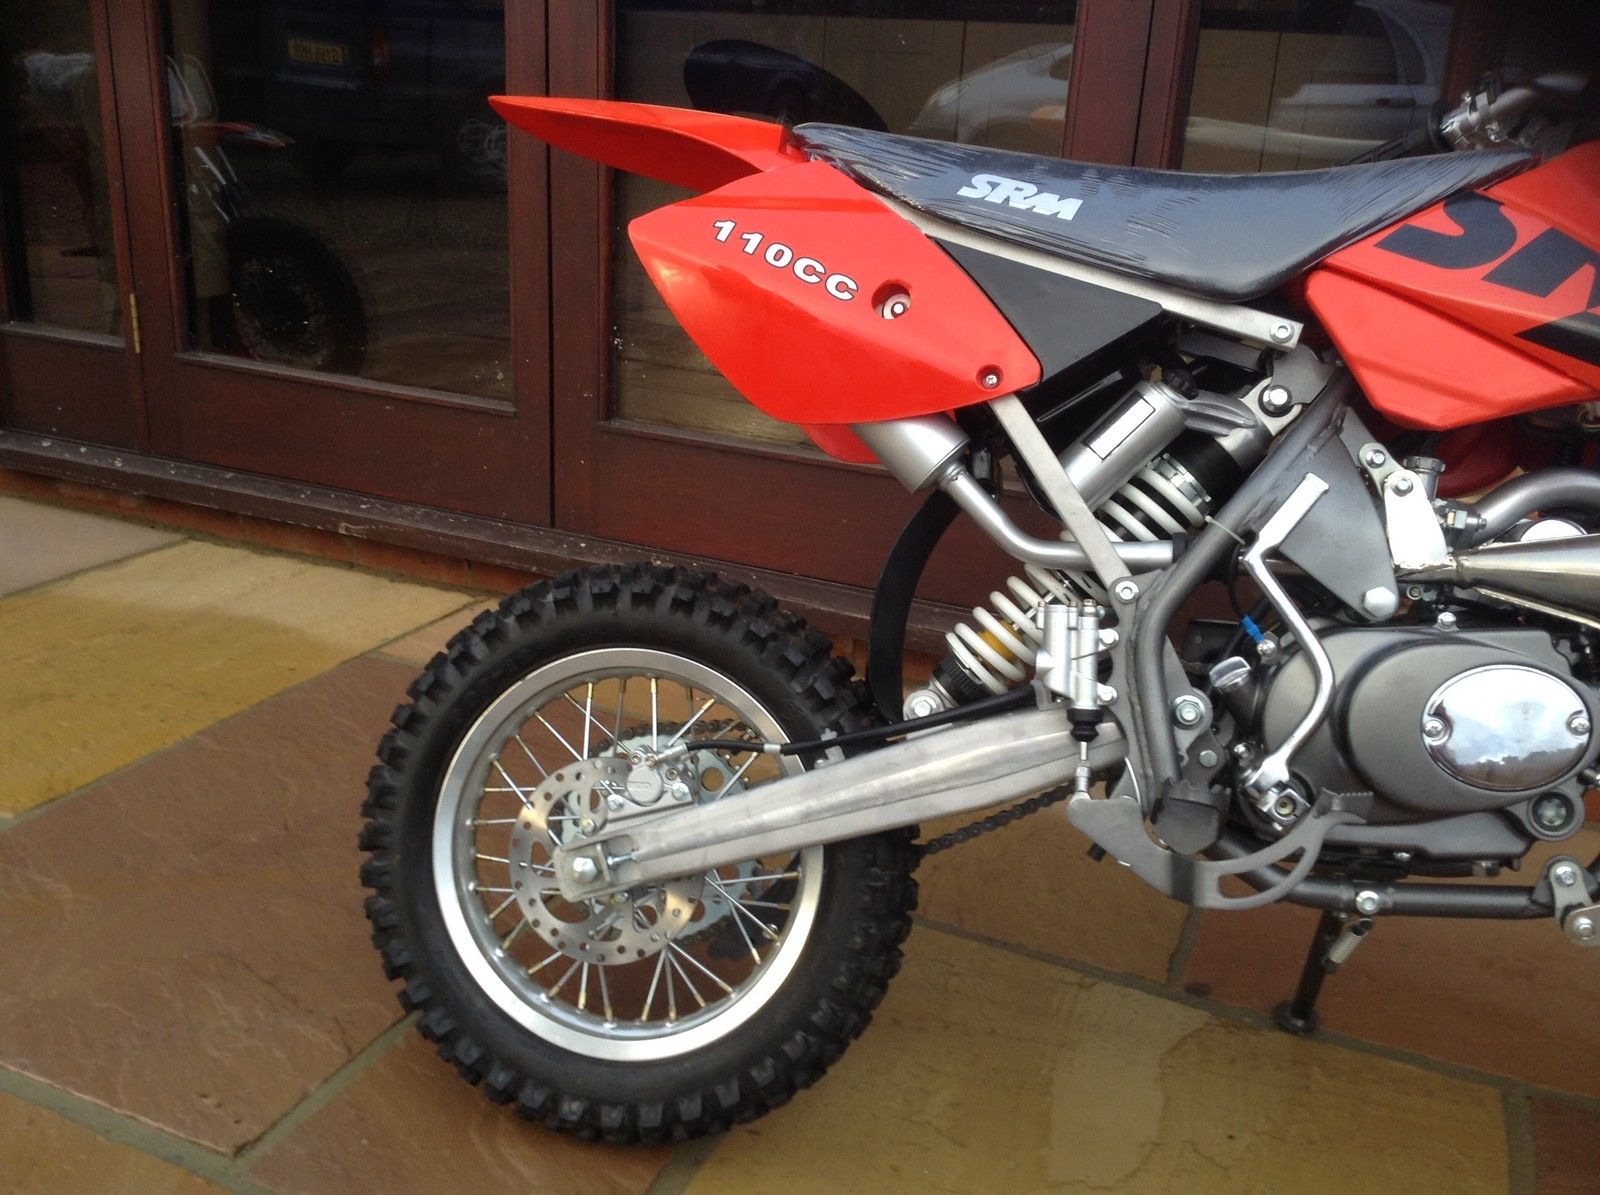 **BRAND NEW** SRM DIRT BIKE. BASED ON A KTM 65.**BACK IN STOCK** GREAT NEW PRICE